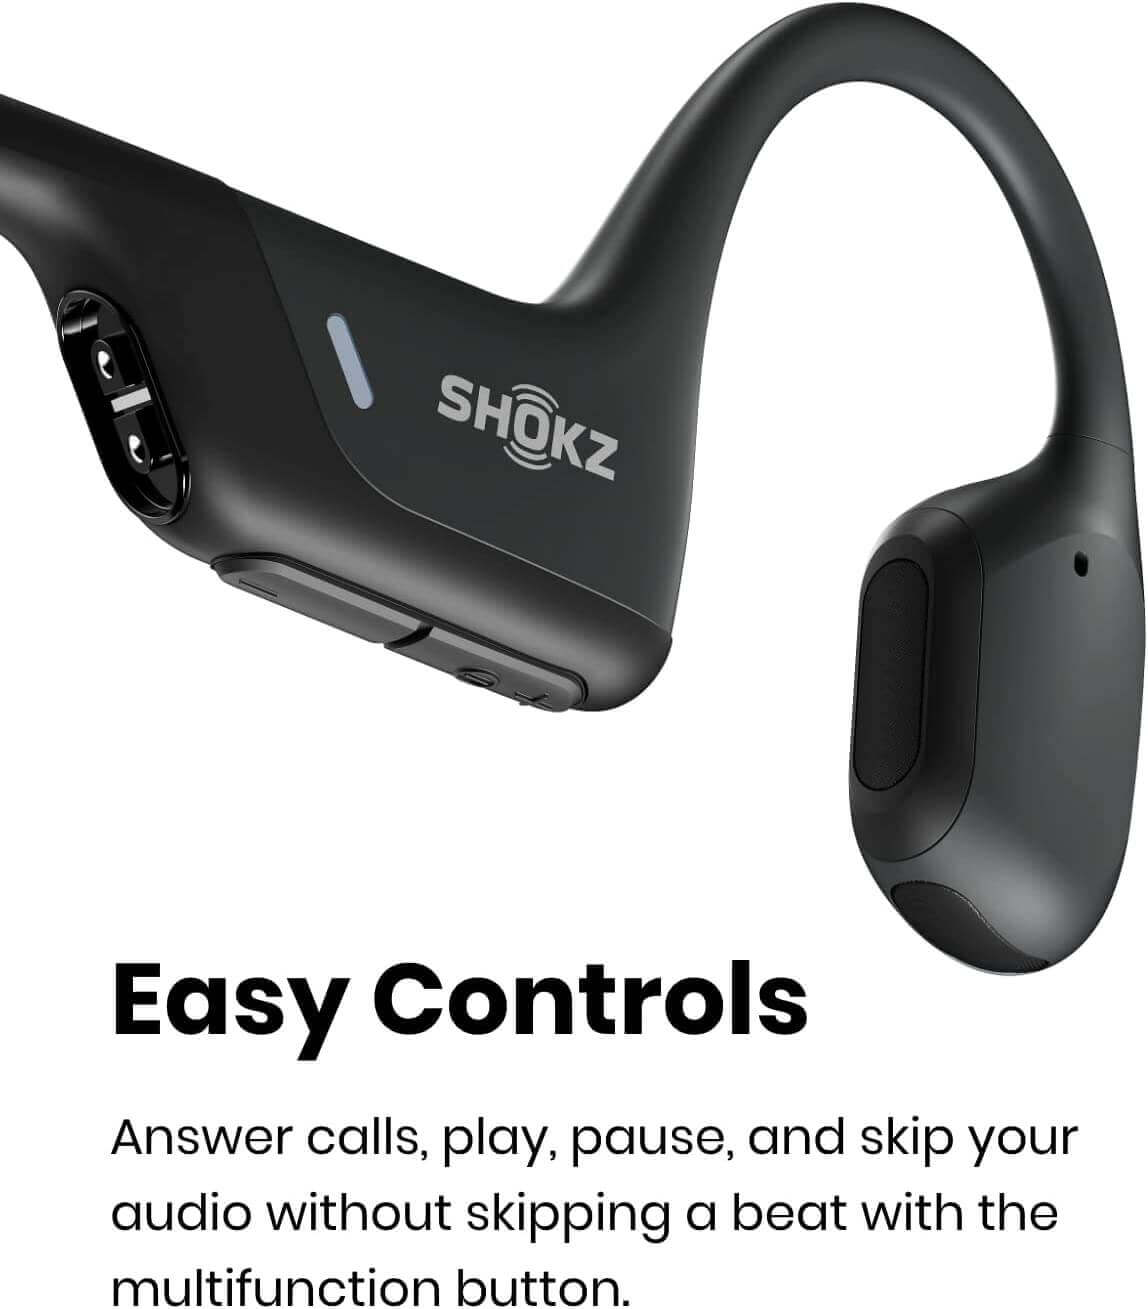 shokz openrun pro with easy to use and access controls